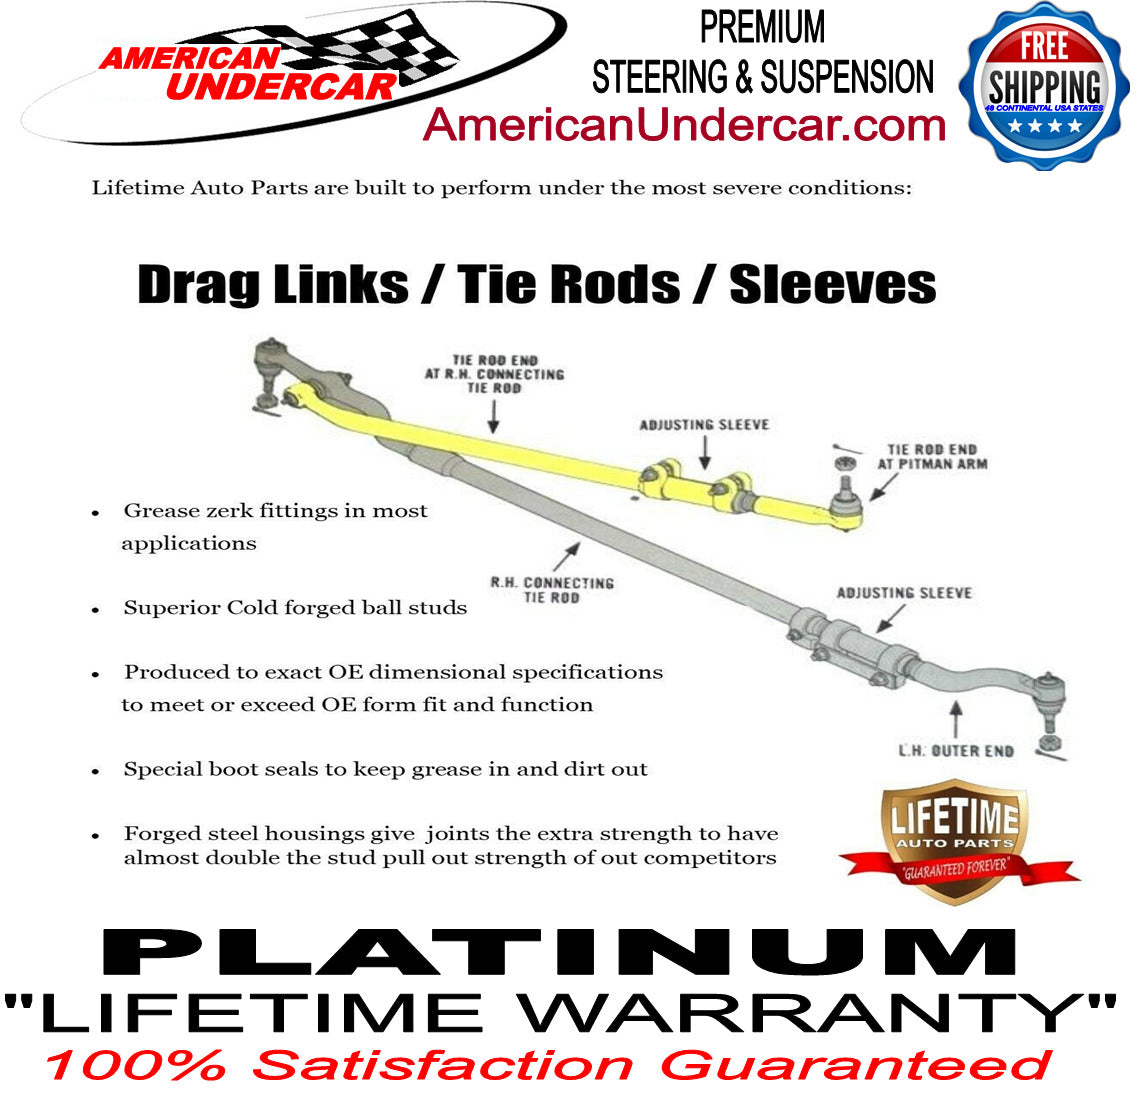 Lifetime Ball Joint Tie Rod Drag Link Kit for 1985-1994 Ford F250 4x4 3850lb Axle